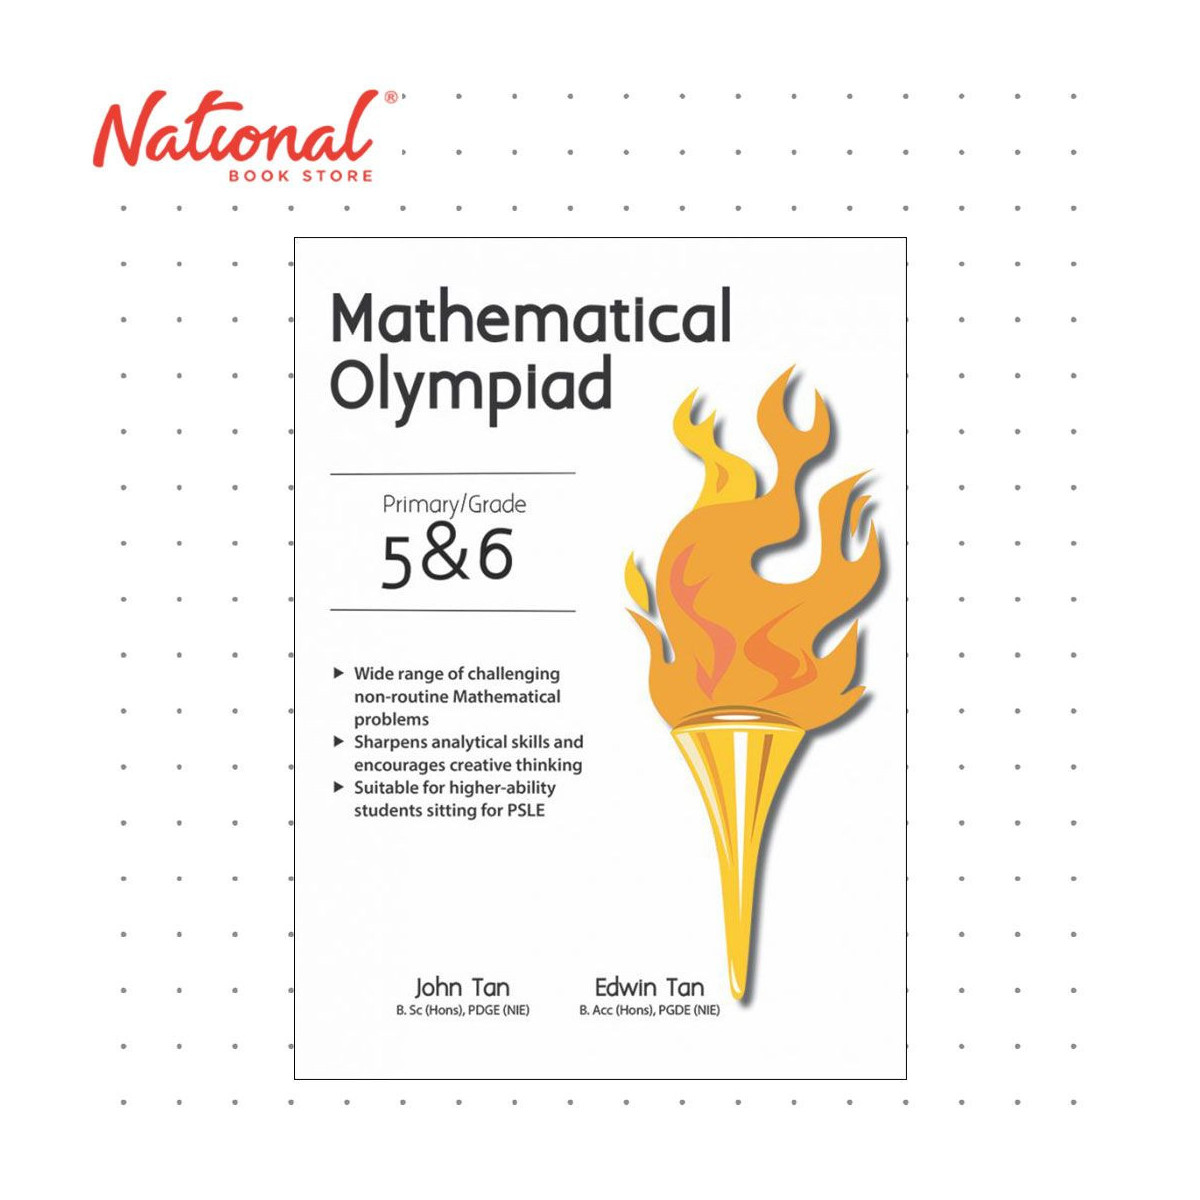 TAN　EDWIN　OLYMPIAD　BY　BOOKS　MATHEMATICAL　PAPERBACK　SPECIAL　SCHOOL　TAN　AND　ORDER*　JOHN　PRIMARY/GRADE　TRADE